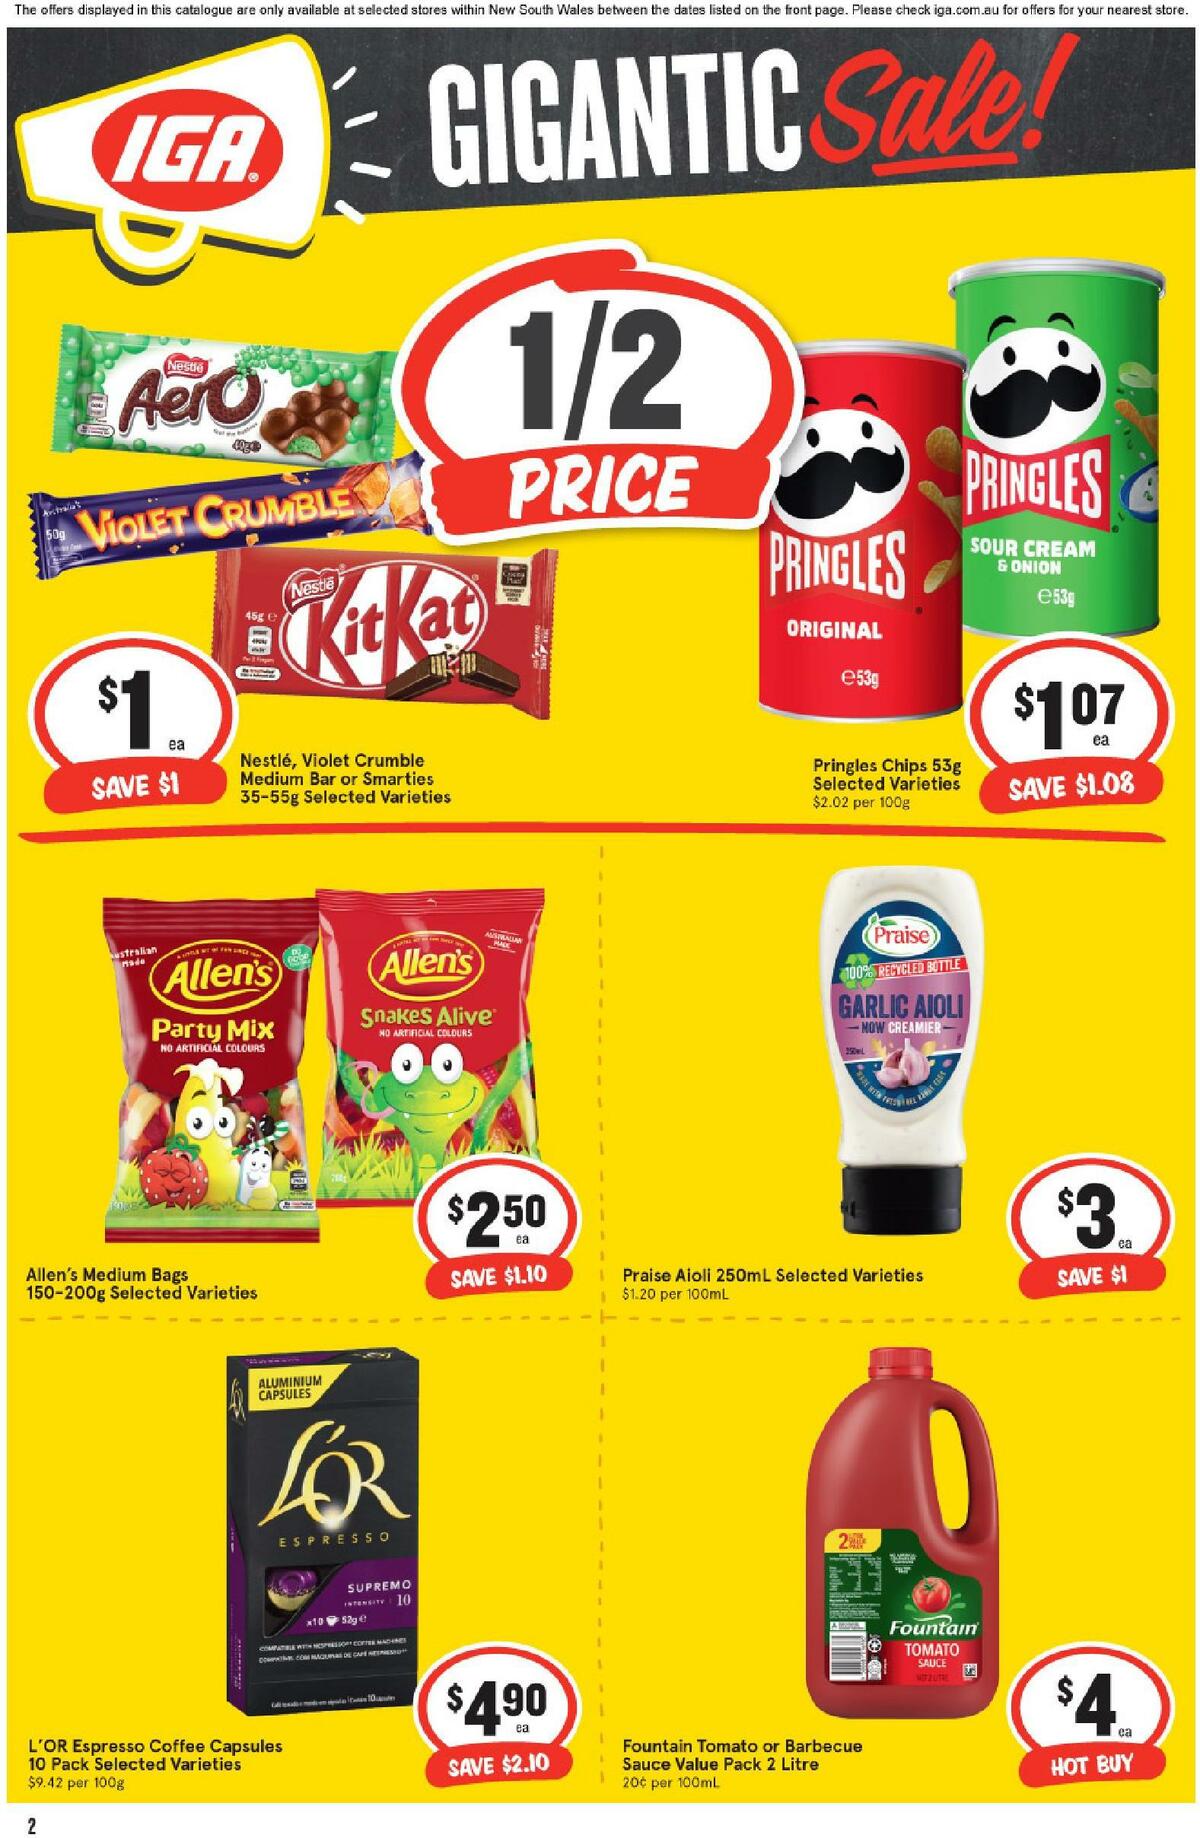 IGA Catalogues from 27 April